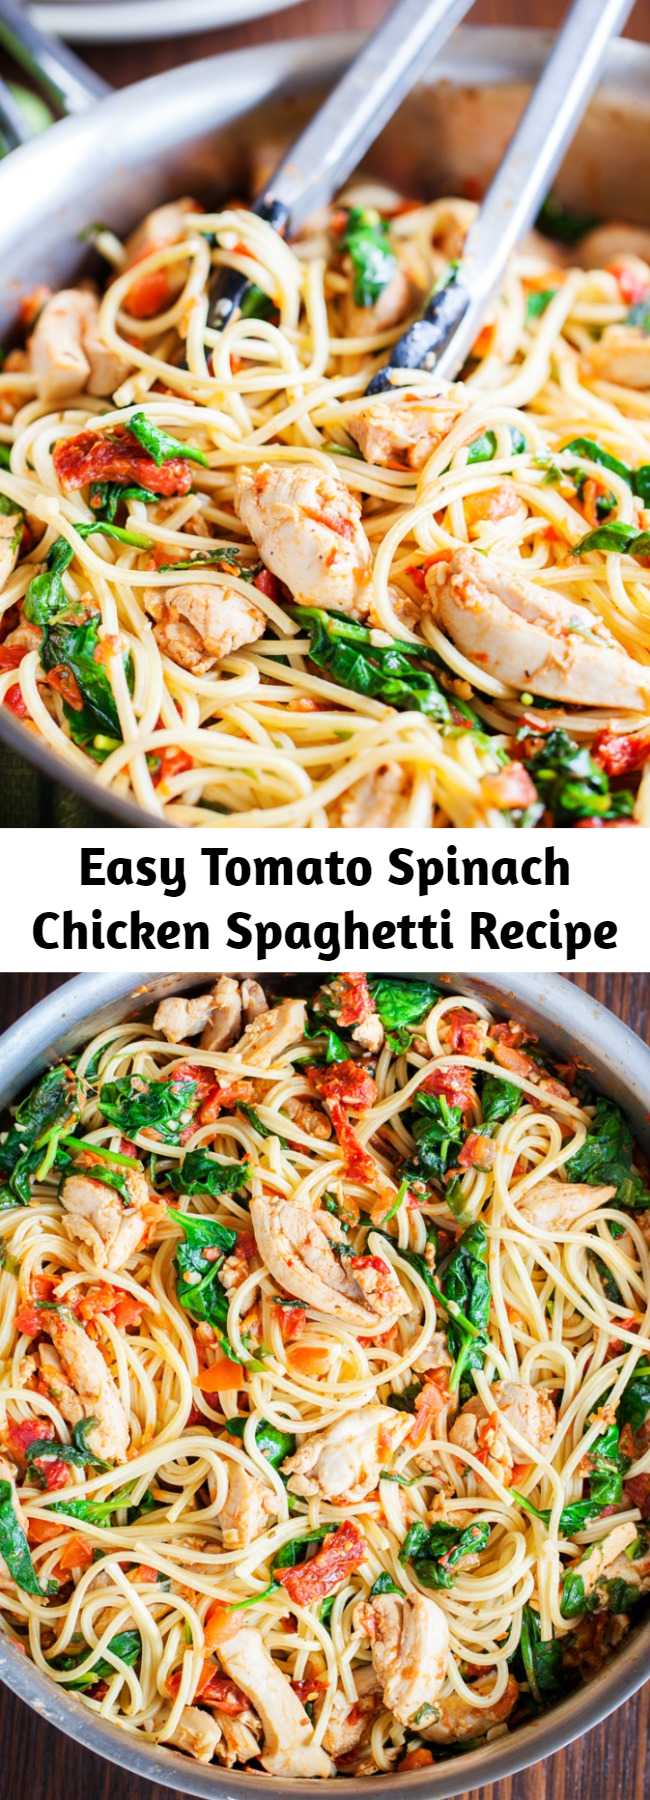 Easy Tomato Spinach Chicken Spaghetti Recipe - One bite of this Tomato Spinach Chicken Spaghetti and you will never buy jarred tomato sauce ever again. Spaghetti is tossed in a fresh and flavorful sauce with pieces of juicy chicken. Fresh spinach adds a boost of nutrients, but feel free to use other vegetables to customize to your family’s liking.